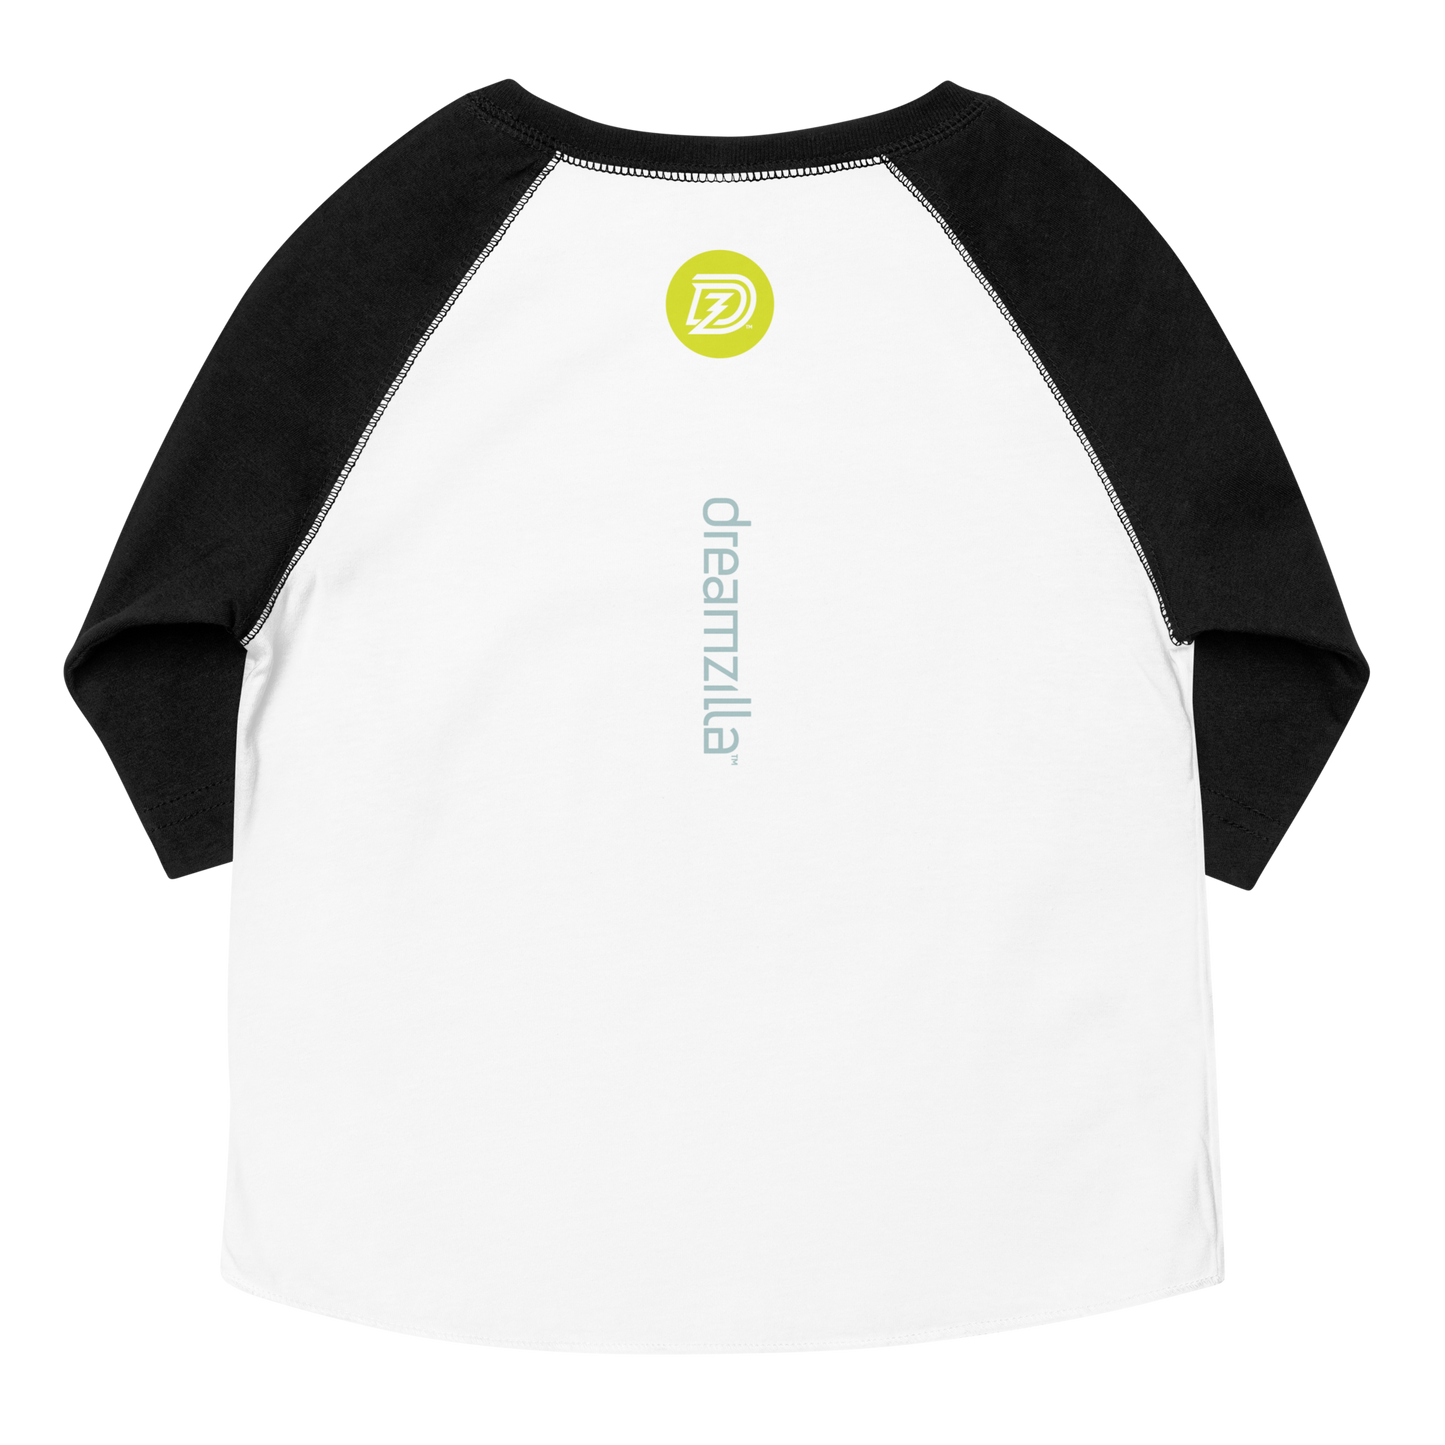 Back of Team Zilla 2022 Toddler Shirt in White with Black Sleeves